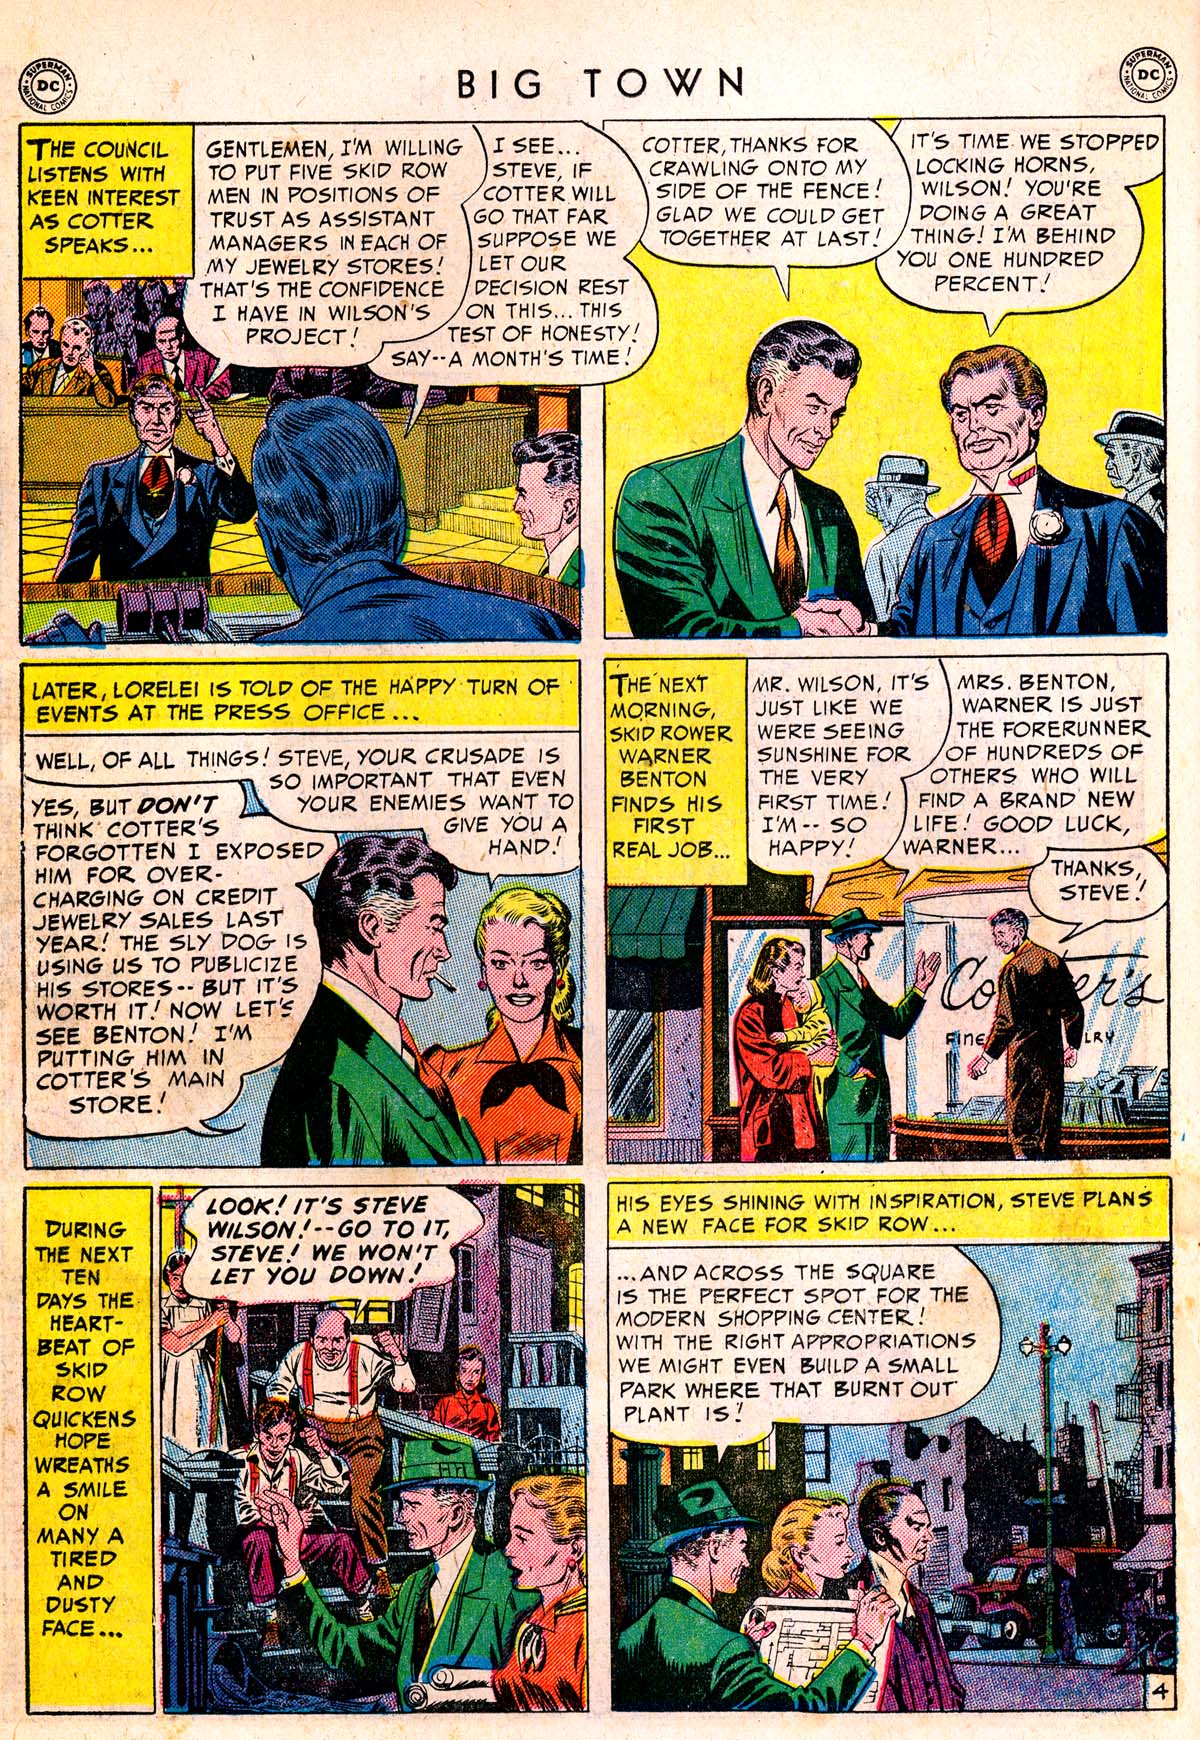 Big Town (1951) 1 Page 17